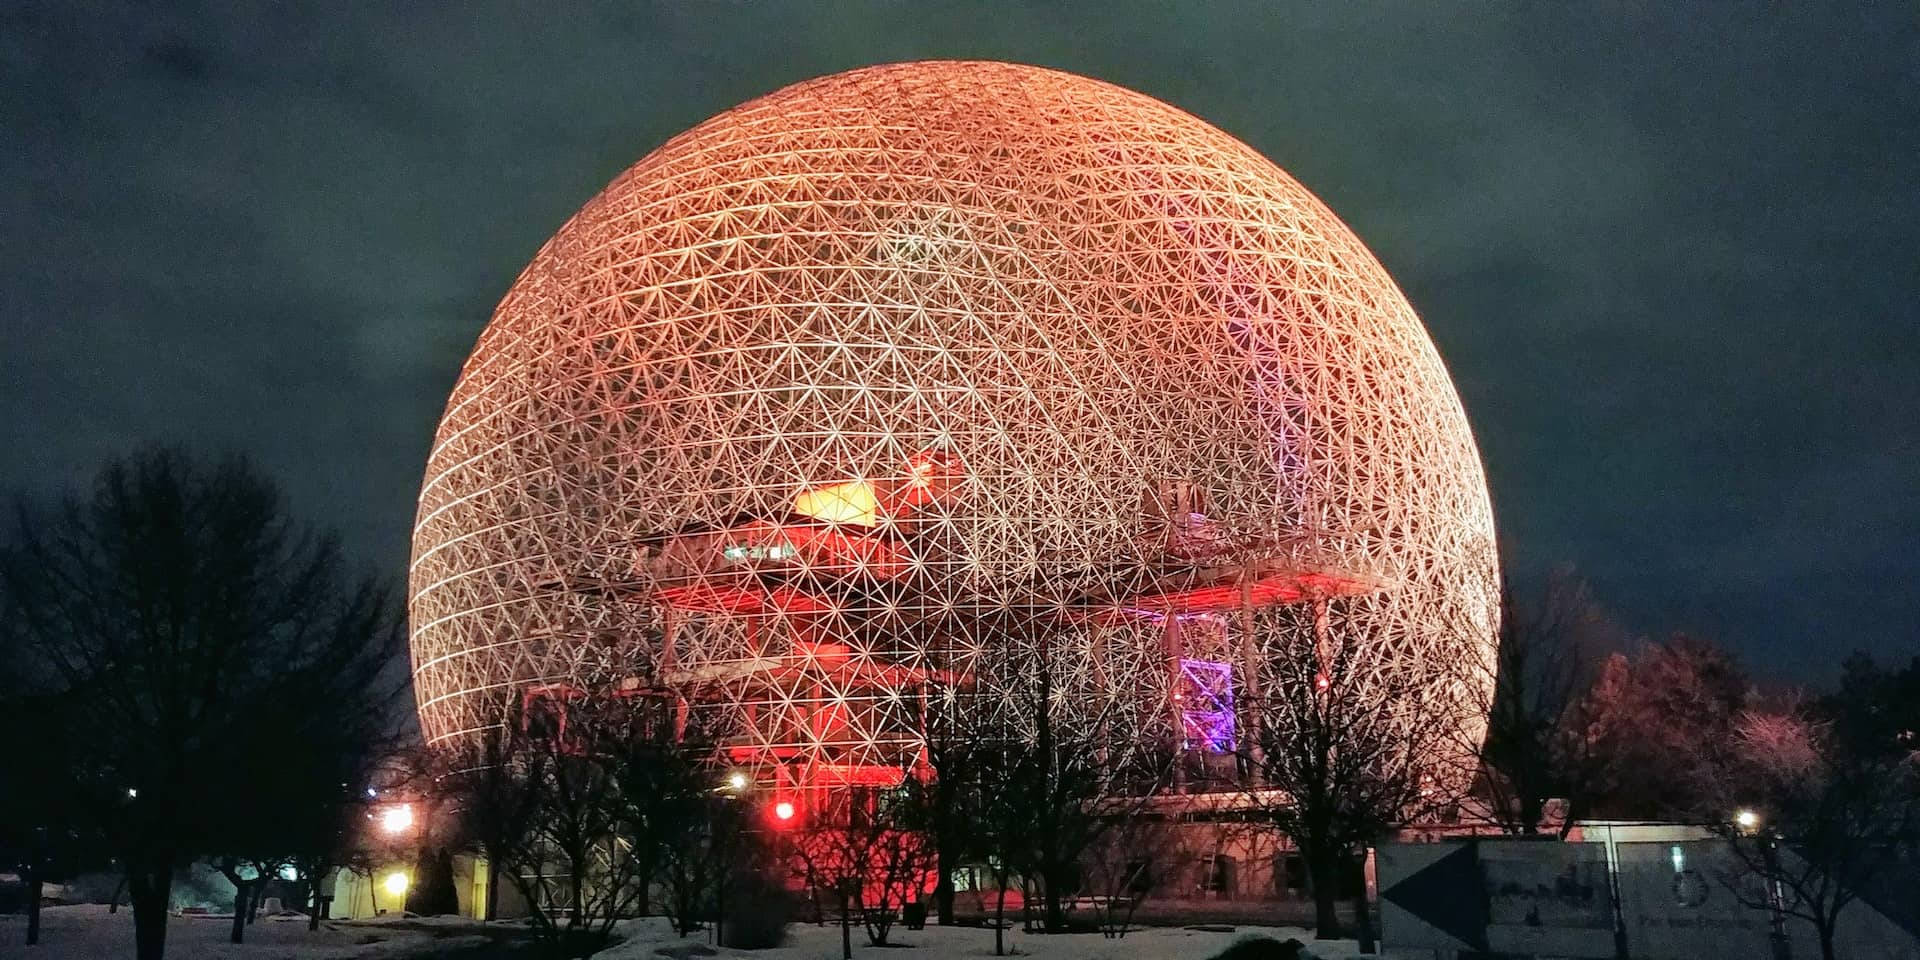 Best things to do in Montreal Canada - Craig Thorn - Montreal Biosphere by Brandon Sehl on Unsplash